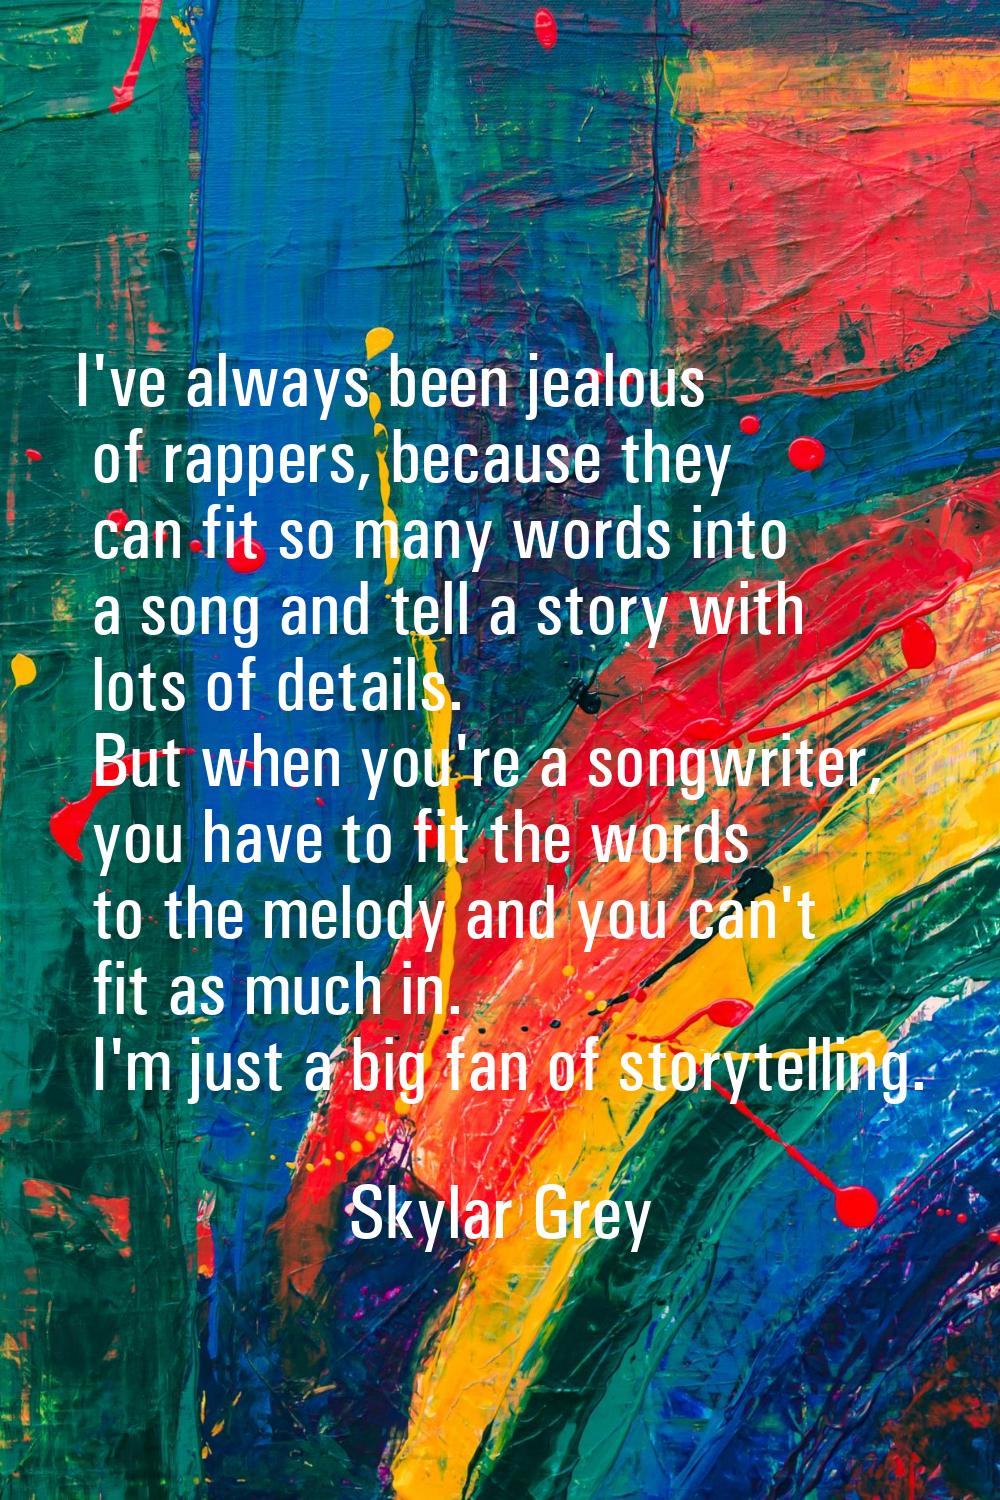 I've always been jealous of rappers, because they can fit so many words into a song and tell a stor